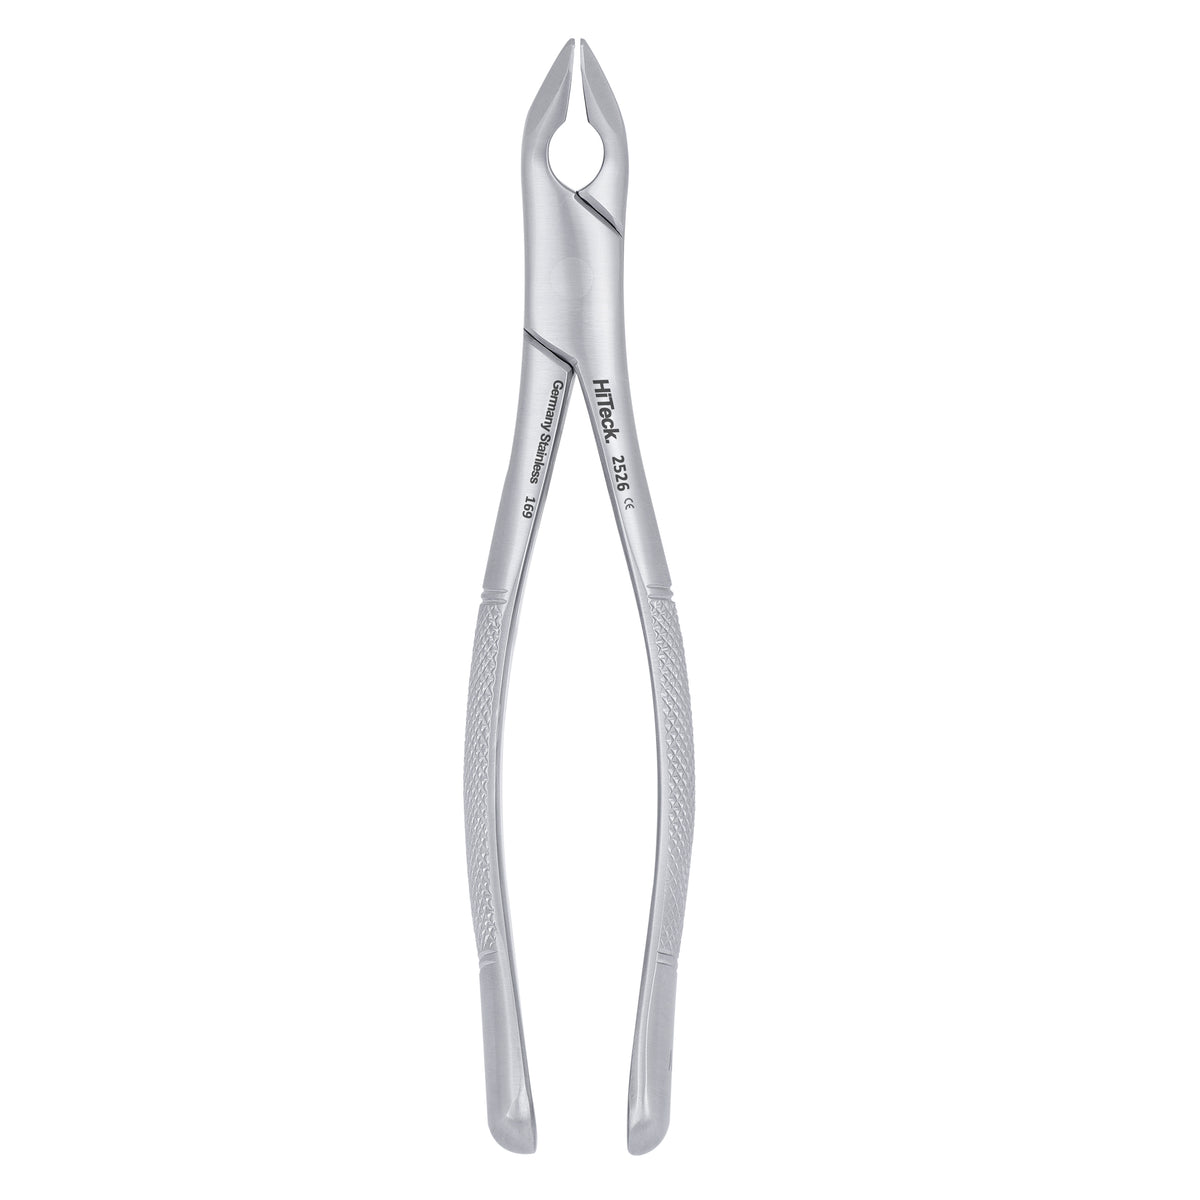 AF151 Apical Lower Universal Extraction Forcep - HiTeck Medical Instruments